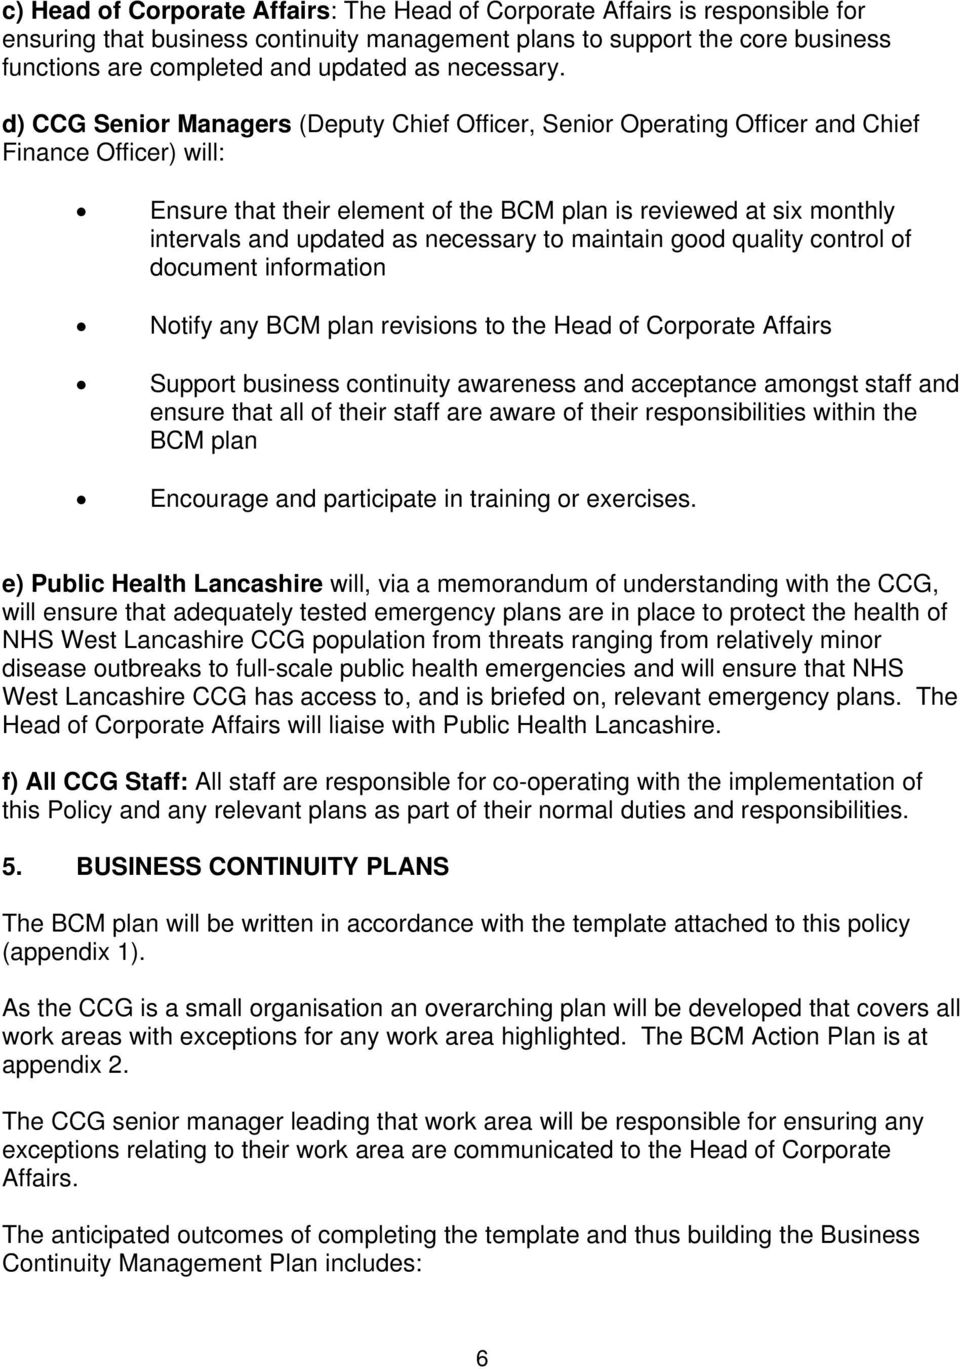 d) CCG Senior Managers (Deputy Chief Officer, Senior Operating Officer and Chief Finance Officer) will: Ensure that their element of the BCM plan is reviewed at six monthly intervals and updated as